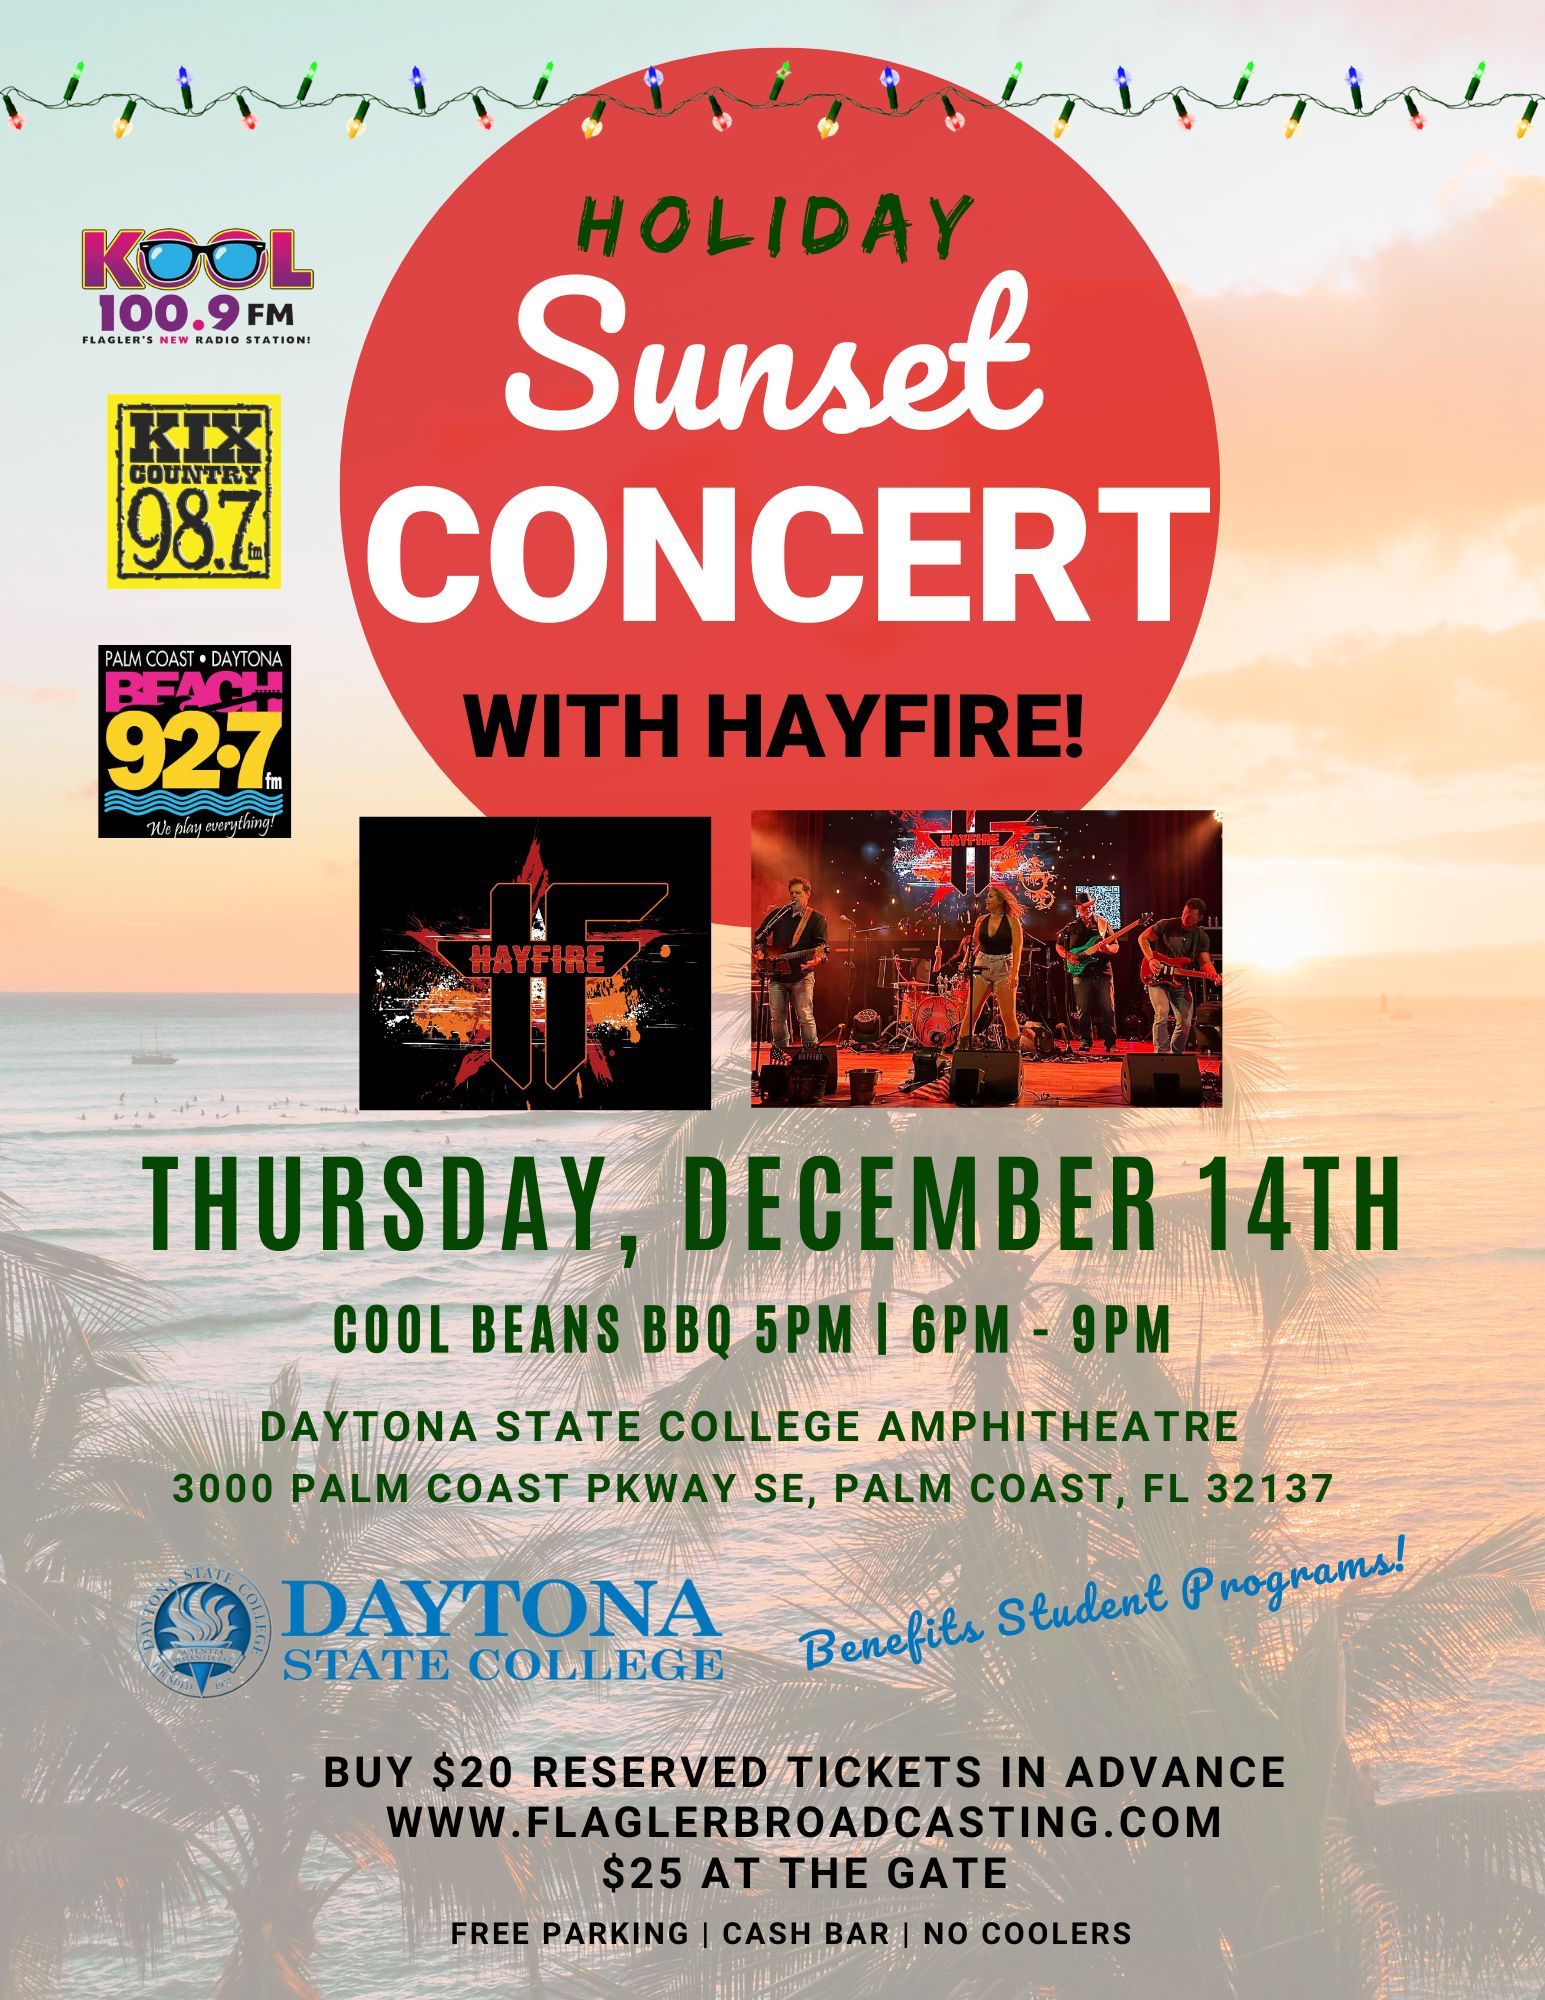 Holiday Sunset Concert with Hayfire